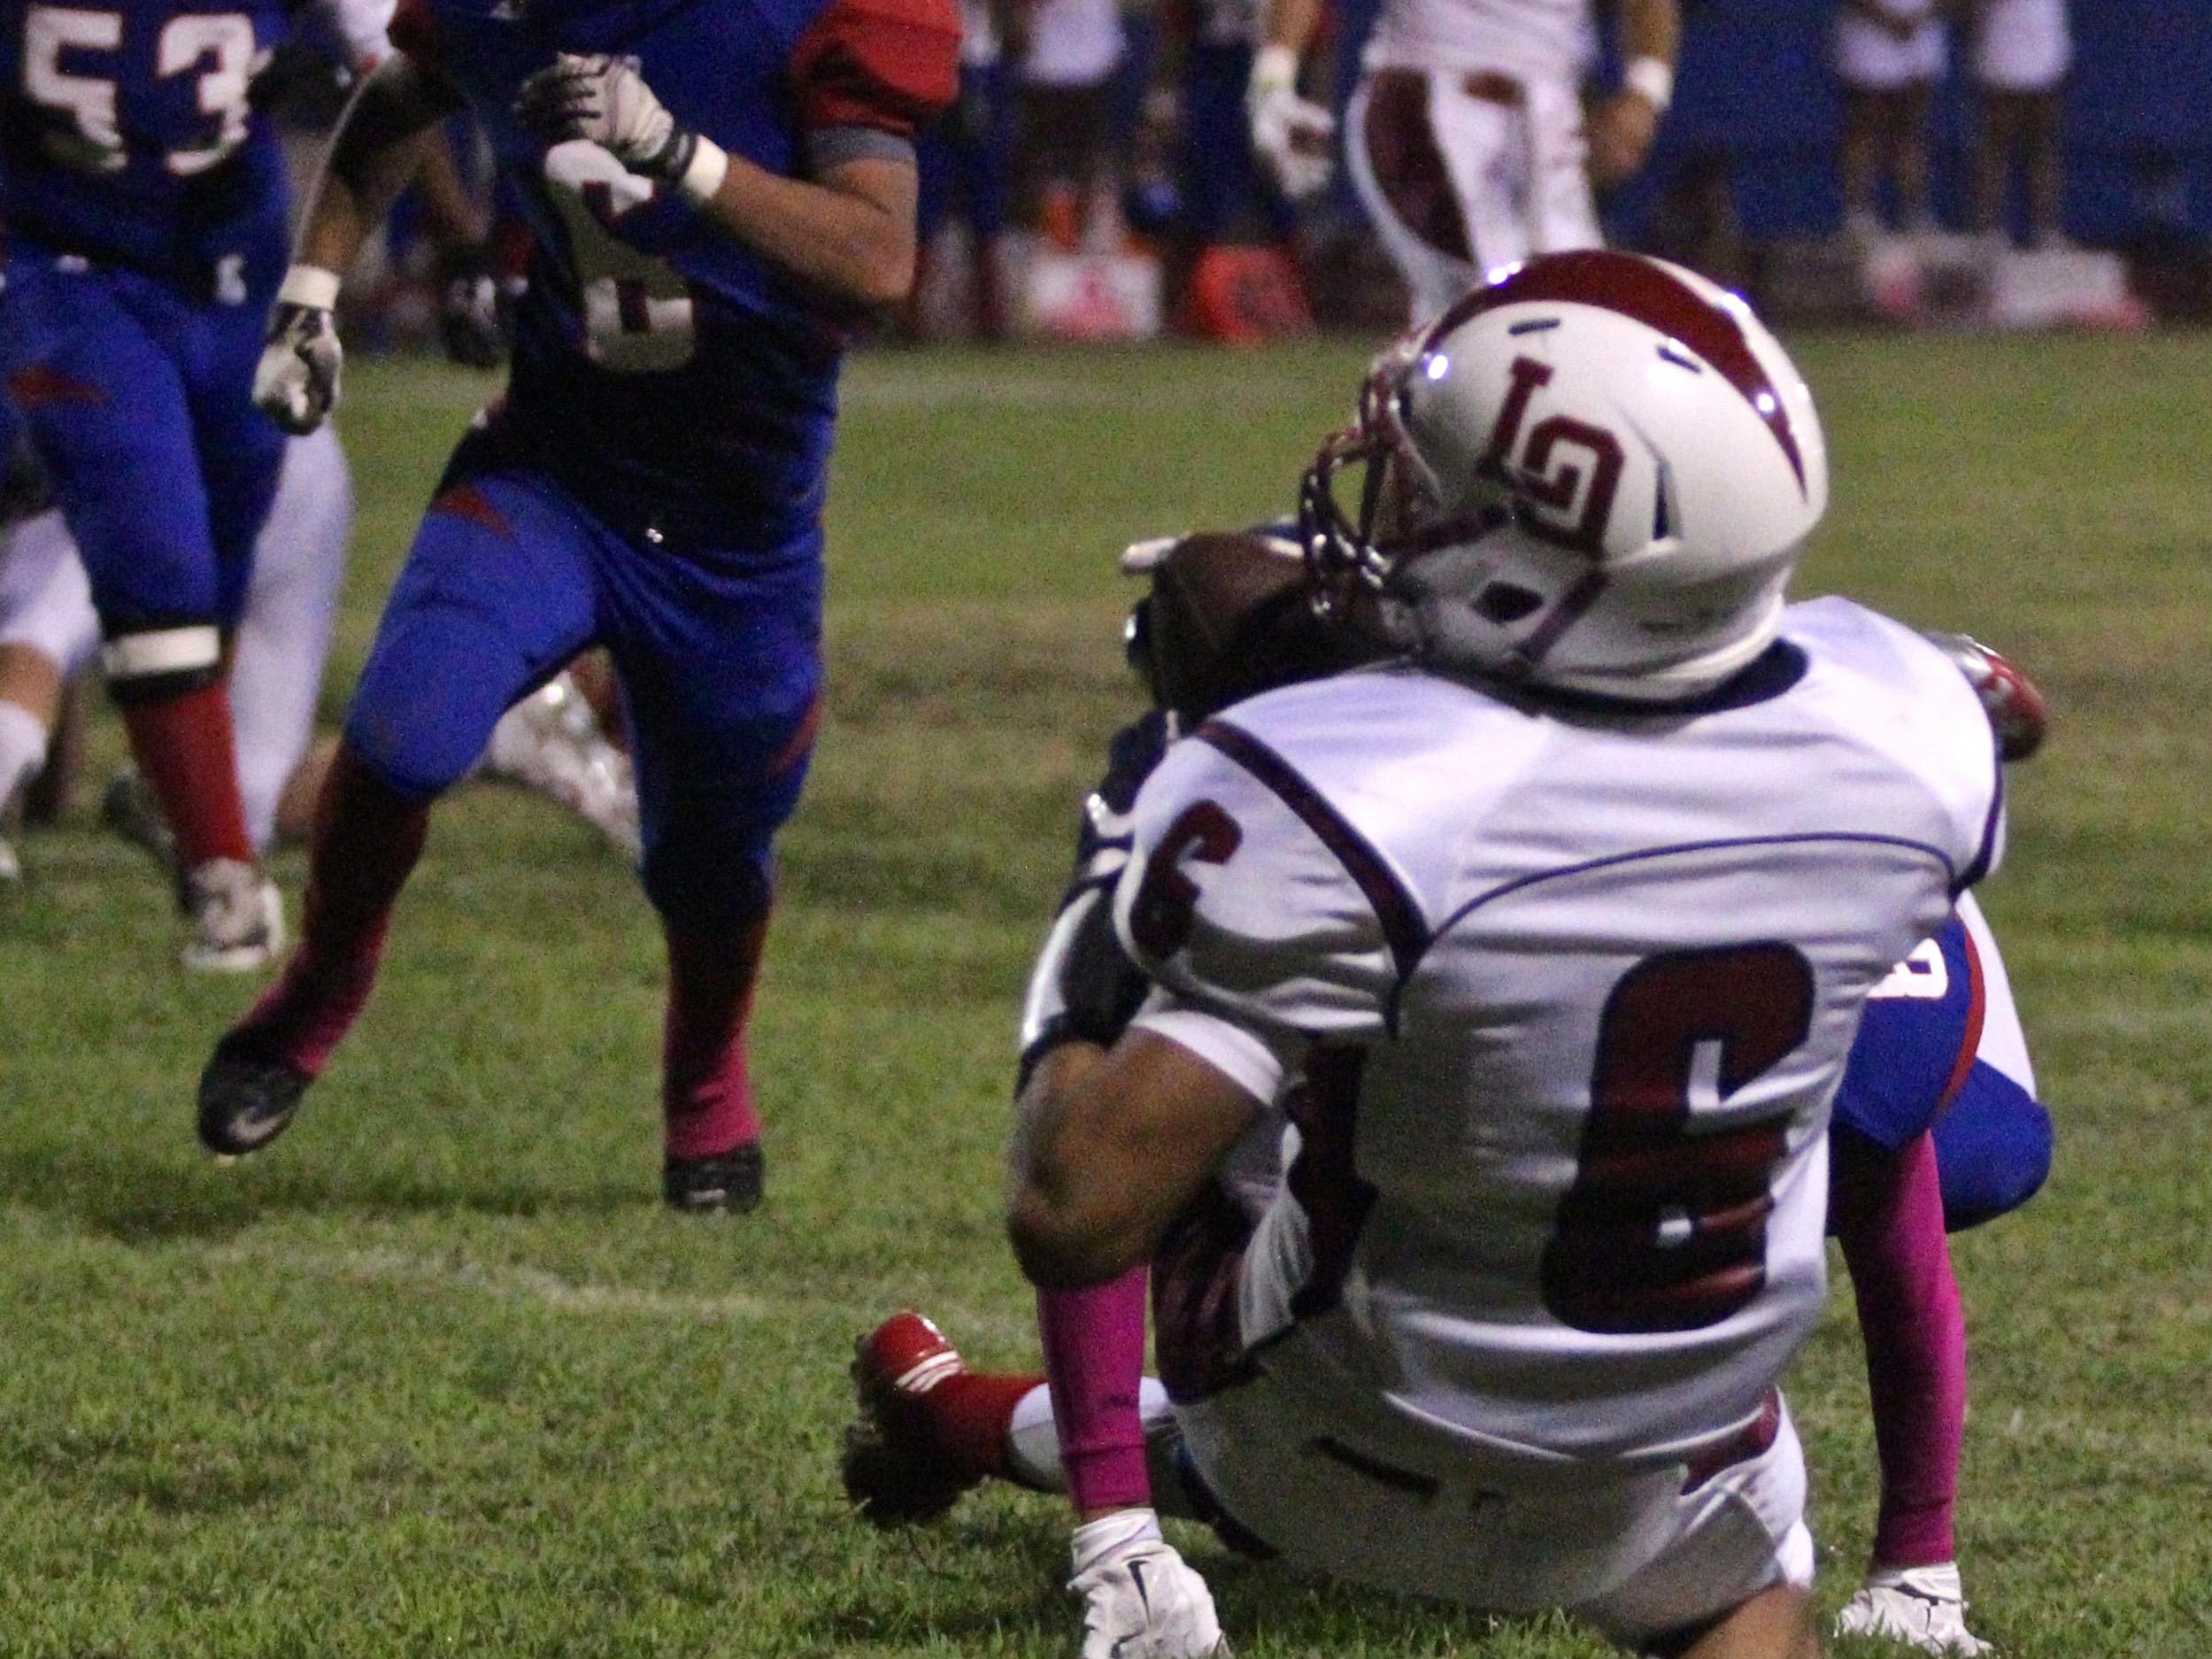 La Quinta’s Joshua Cabrera (6) catches a pass and scores a touchdown at Indio High School on Friday.